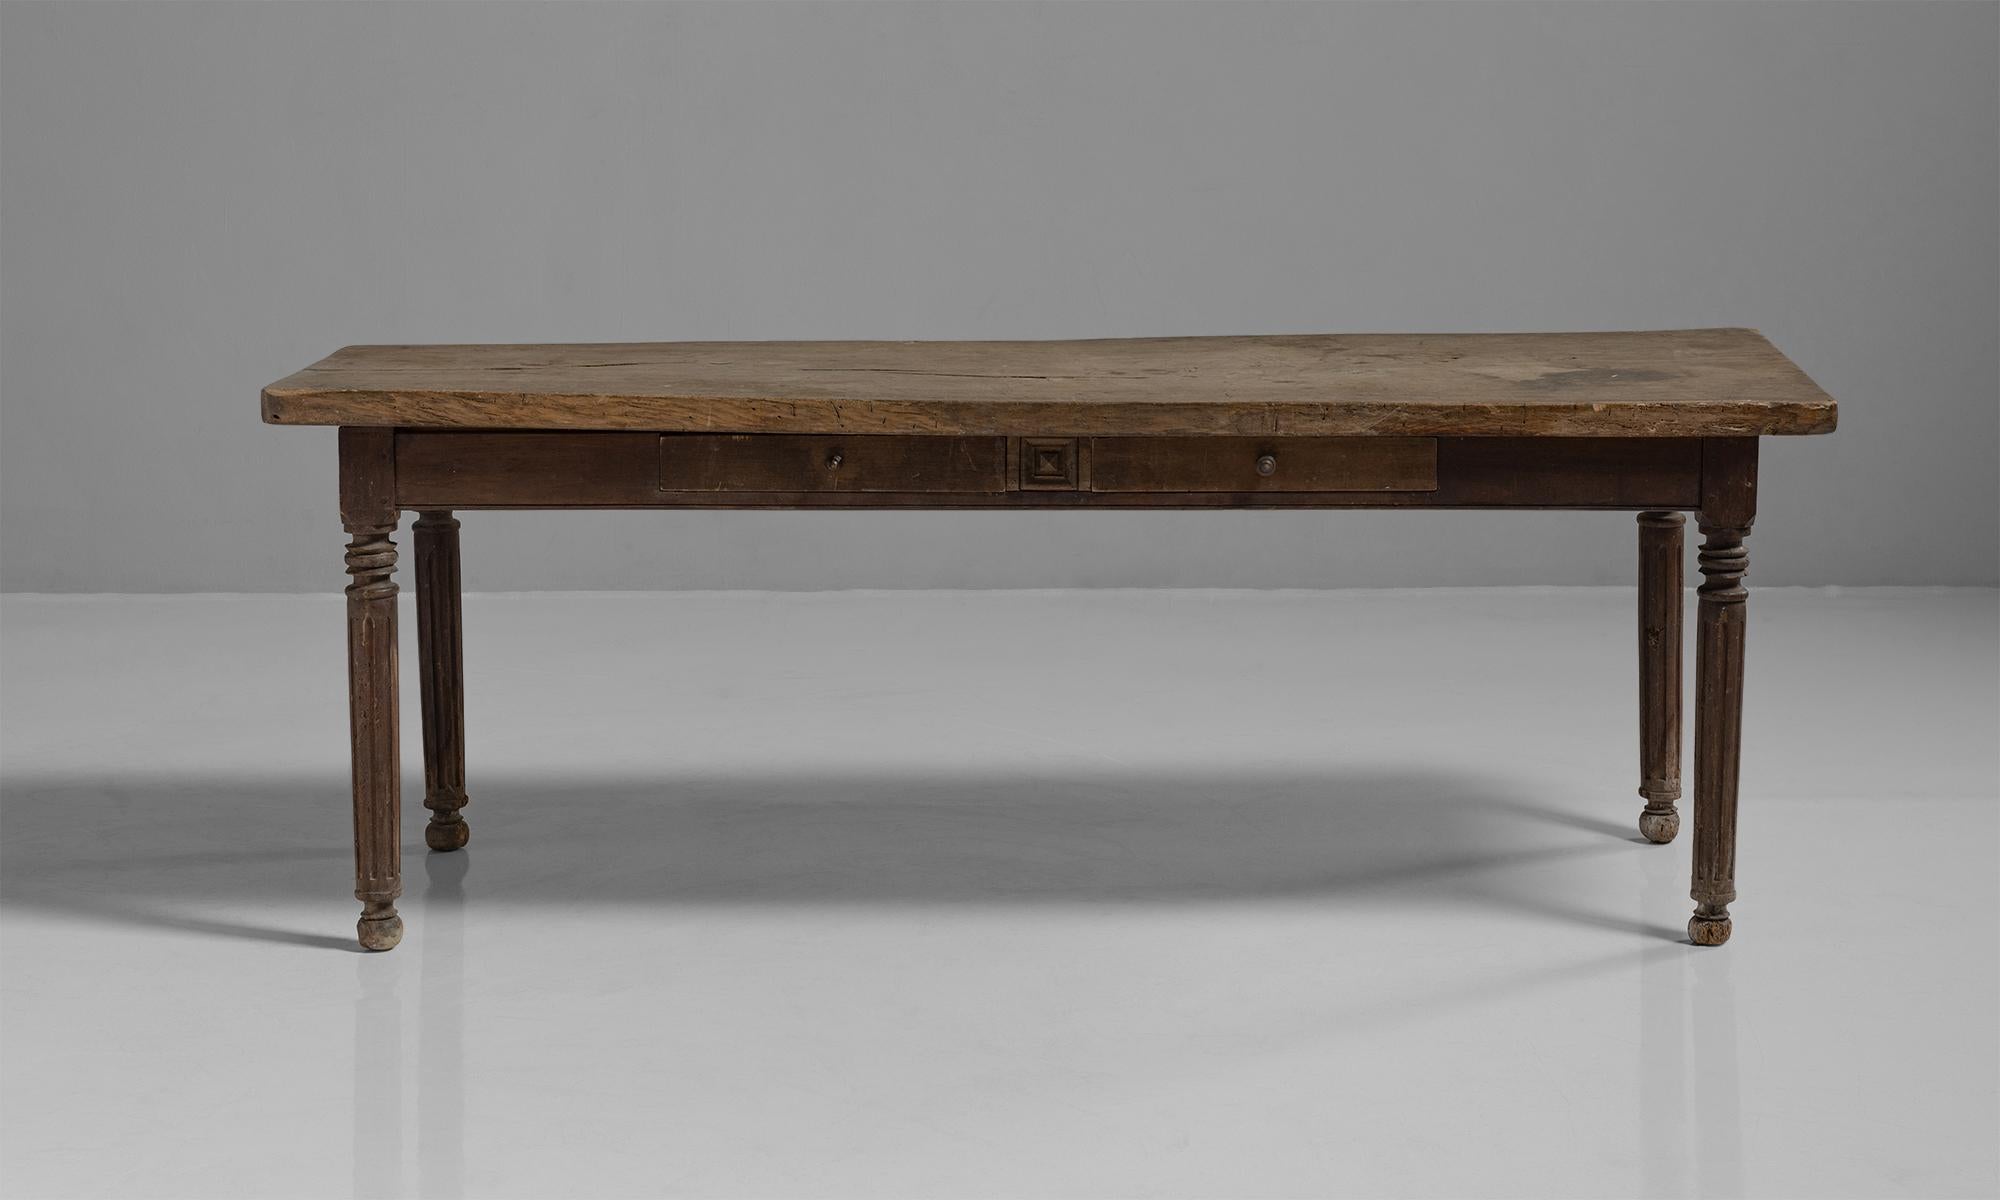 Oak & pine farmhouse table

France circa 1830

Provincial serving table with thick oak slab top over a stained pine base with two frieze drawers.